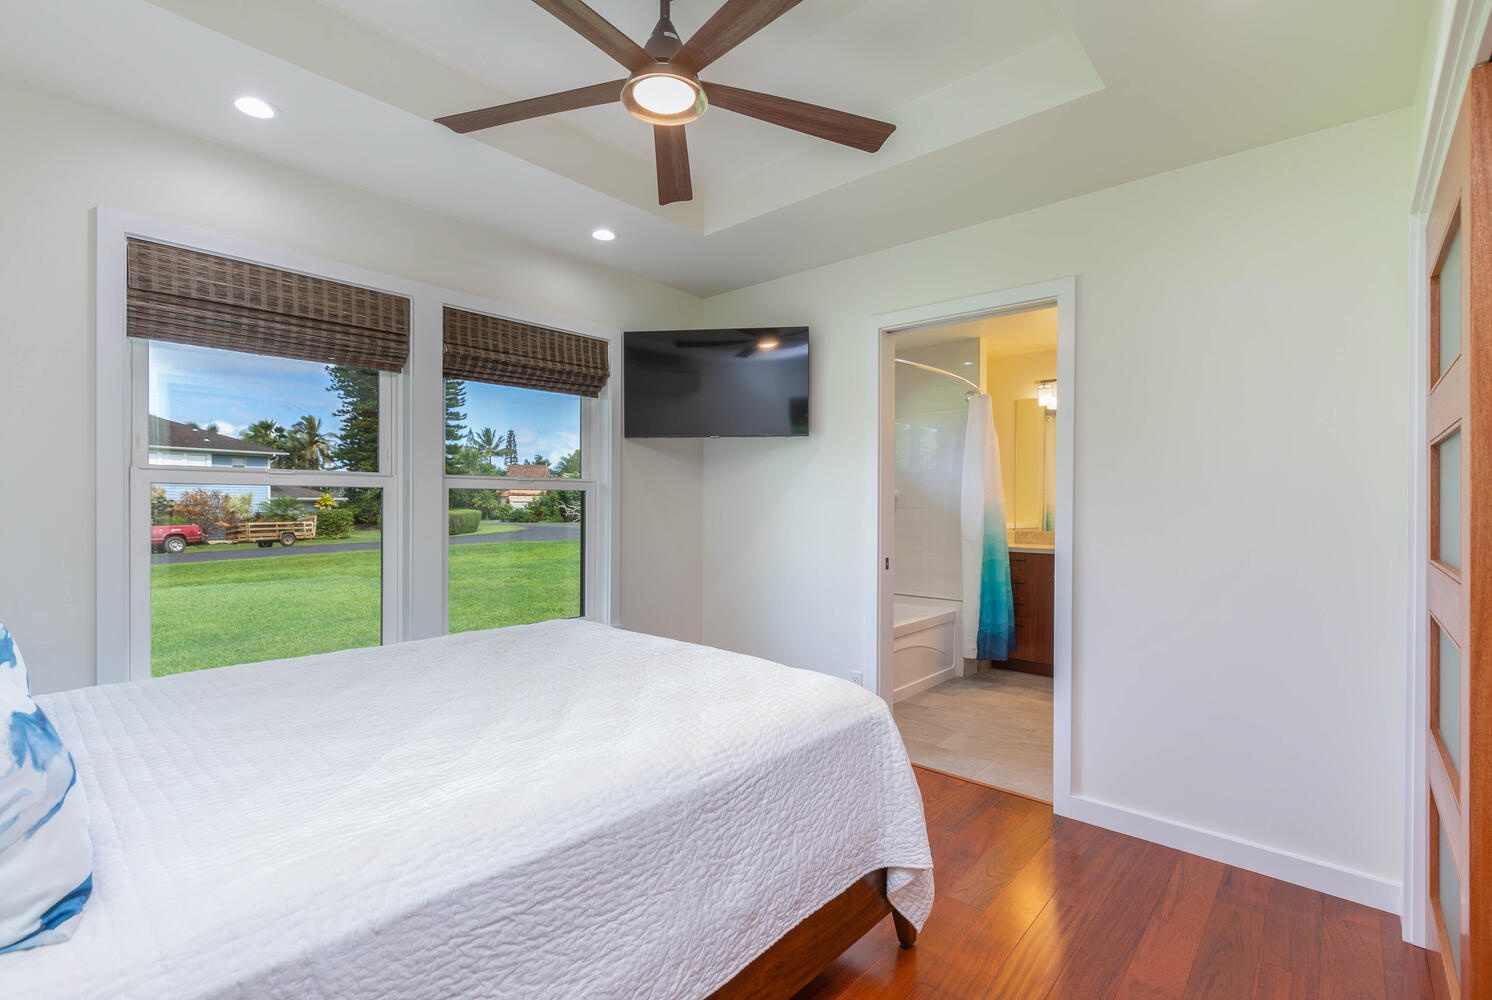 Princeville Vacation Rentals, Aloha Villa - Guest bedroom one offers a queen bed